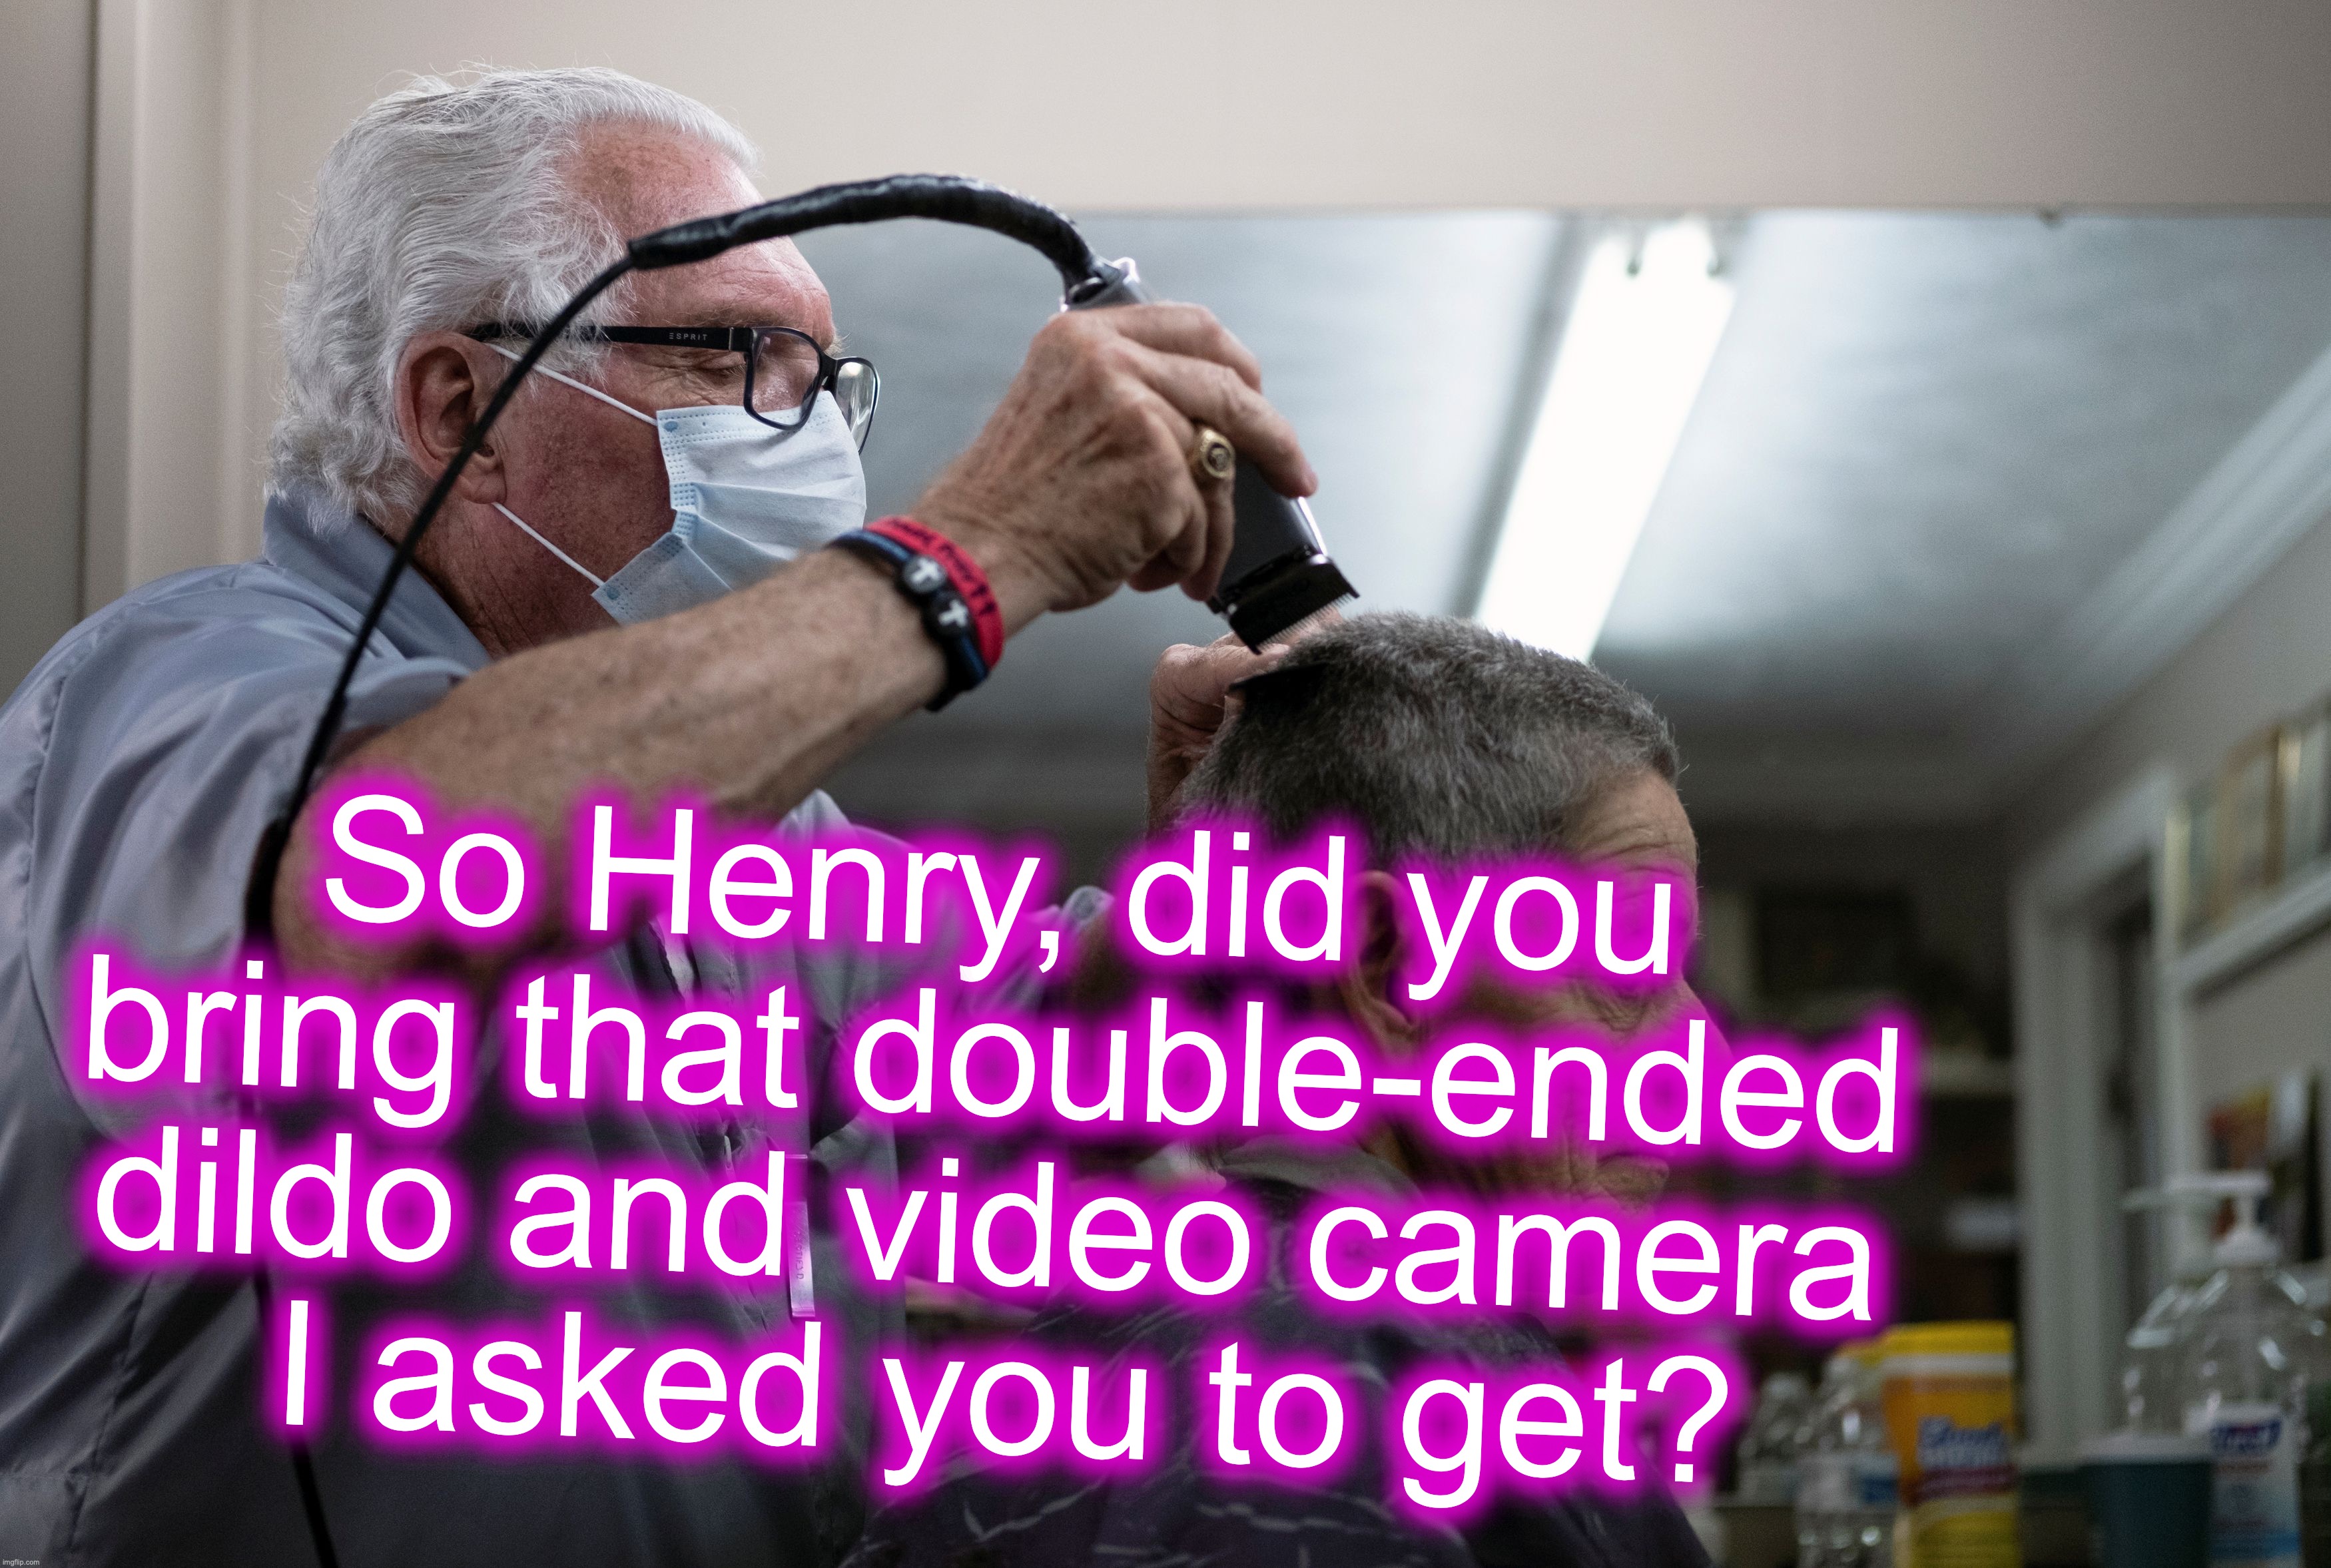 So Henry, did you bring that double-ended dildo and video camera
 I asked you to get? | made w/ Imgflip meme maker